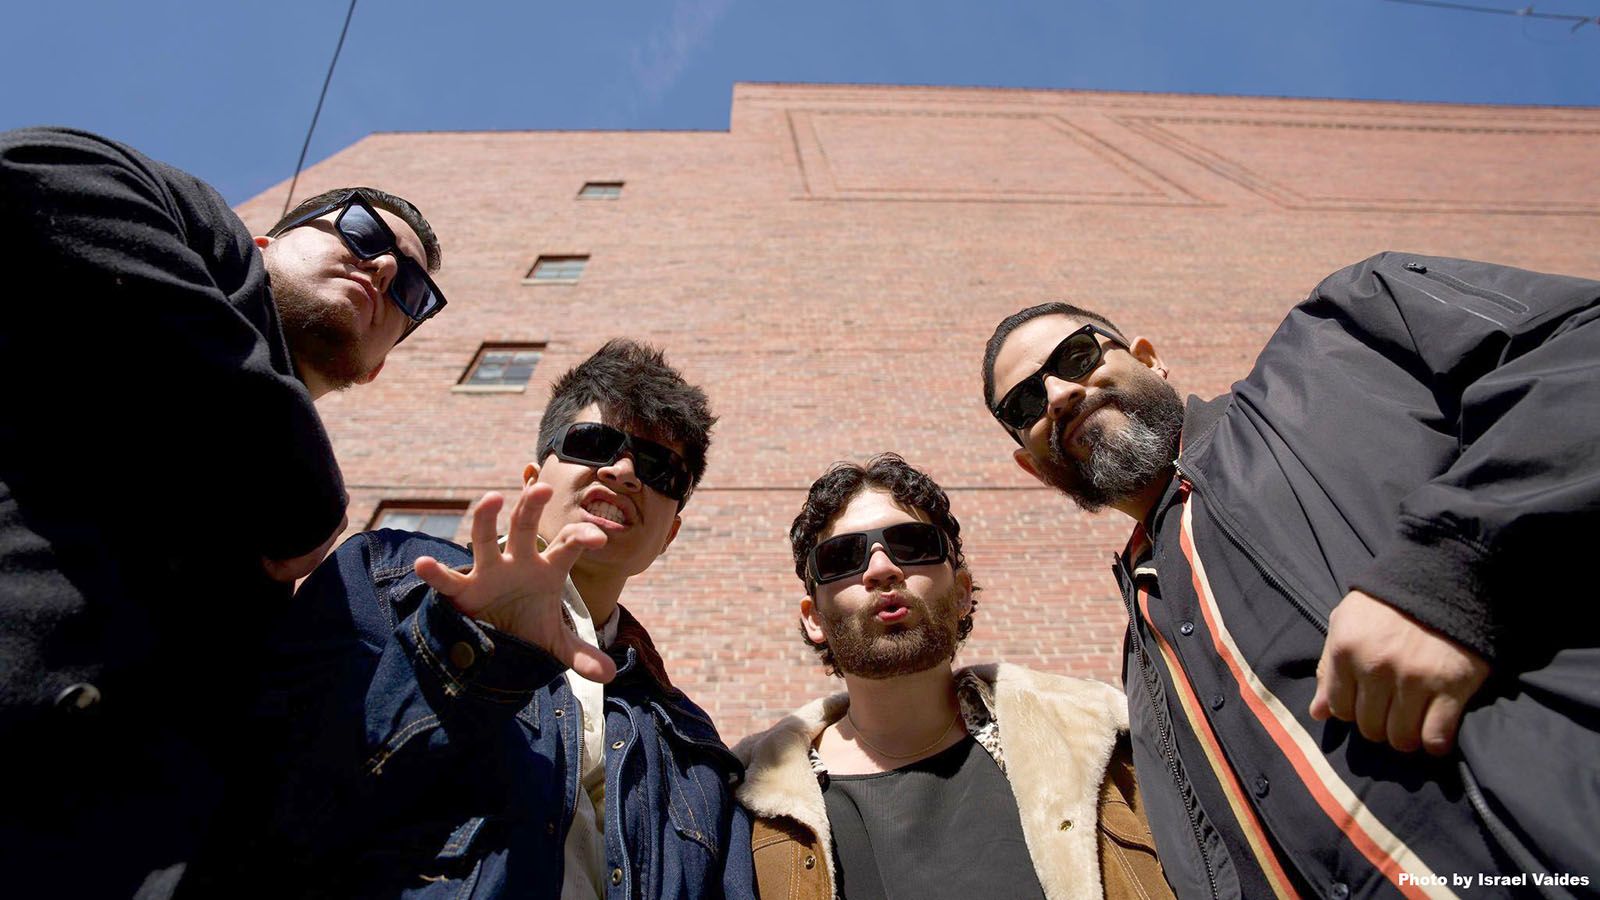 Los Electro was formed following the disbandment of Los Galaxy. The new band includes, from left, Joab Castañeda, Daniel Vaides, David Vaides, and Jesse Gutierrez.